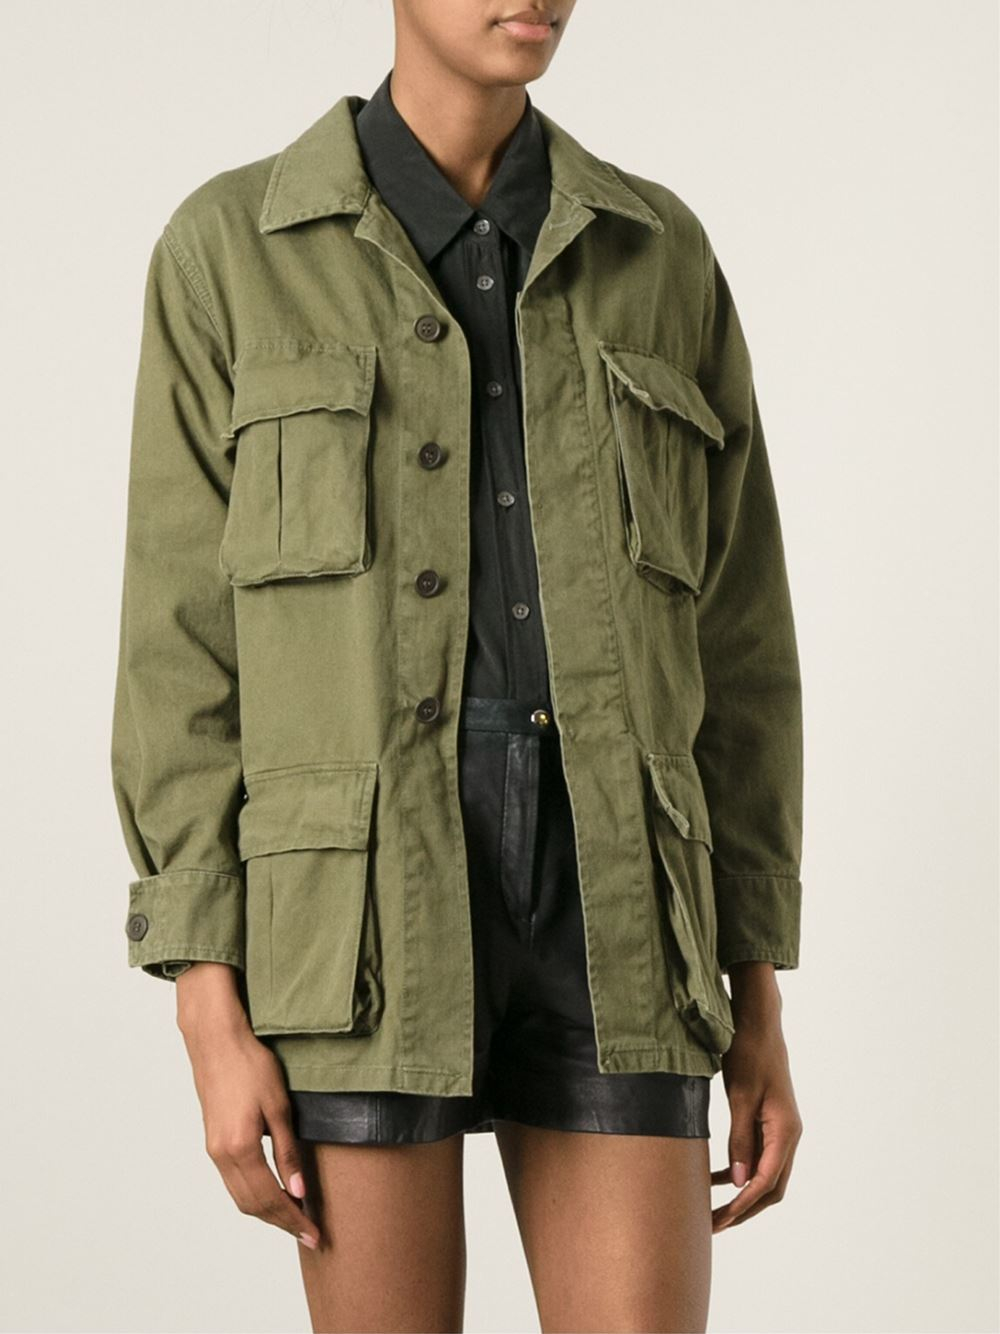 Saint Laurent Embroidered Military Jacket in Green | Lyst